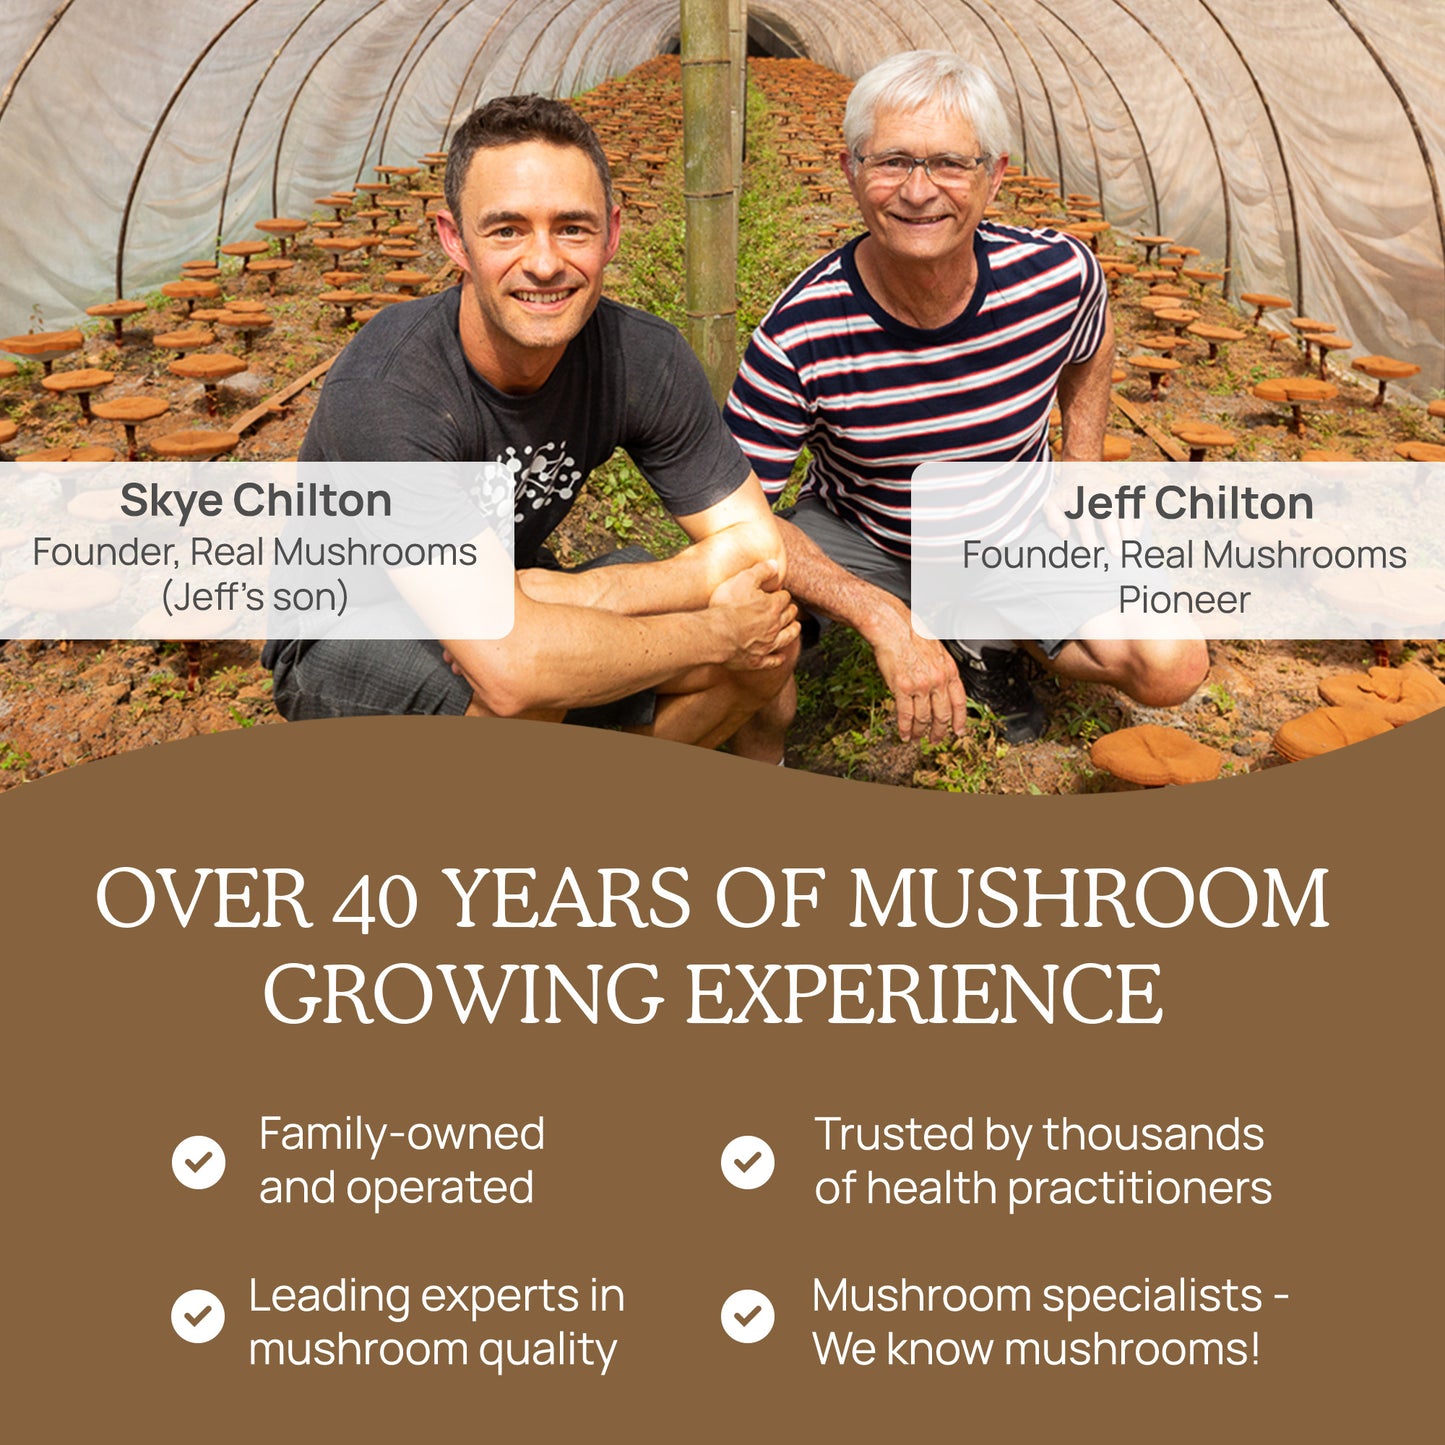 Two men, identified as Skye and Jeff Chilton of Real Mushrooms, smiling inside a mushroom greenhouse surrounded by Lion's Mane mushrooms, with text highlighting over 40 years of experience in mushroom cultivation.